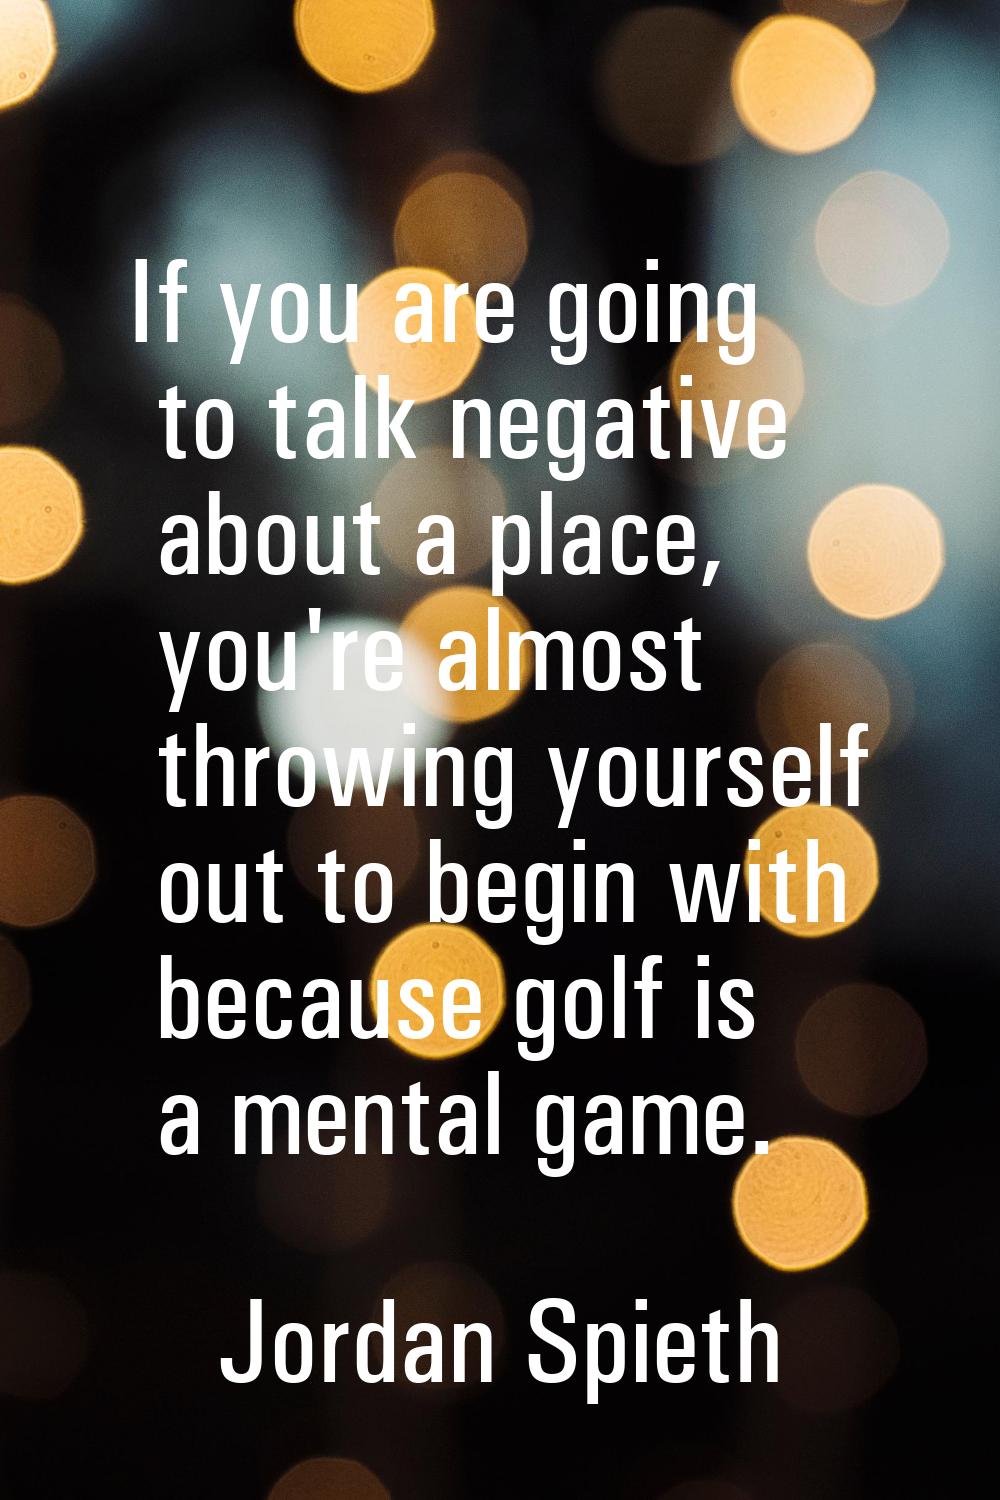 If you are going to talk negative about a place, you're almost throwing yourself out to begin with 